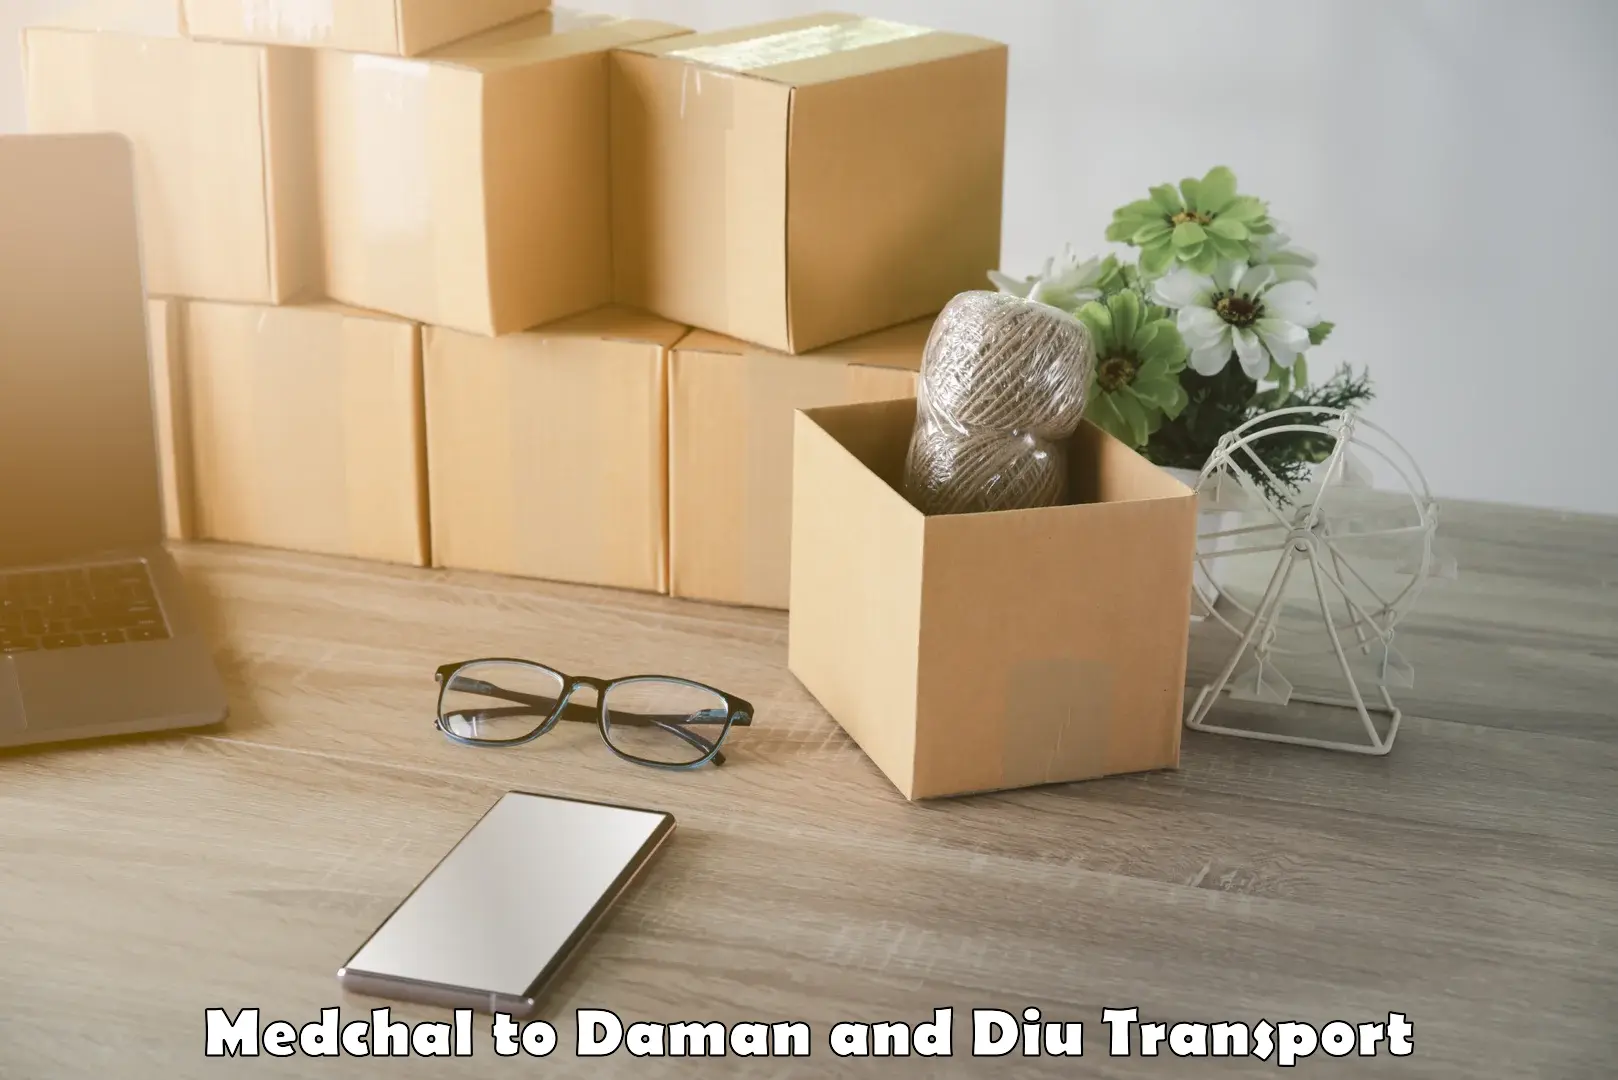 Express transport services Medchal to Daman and Diu